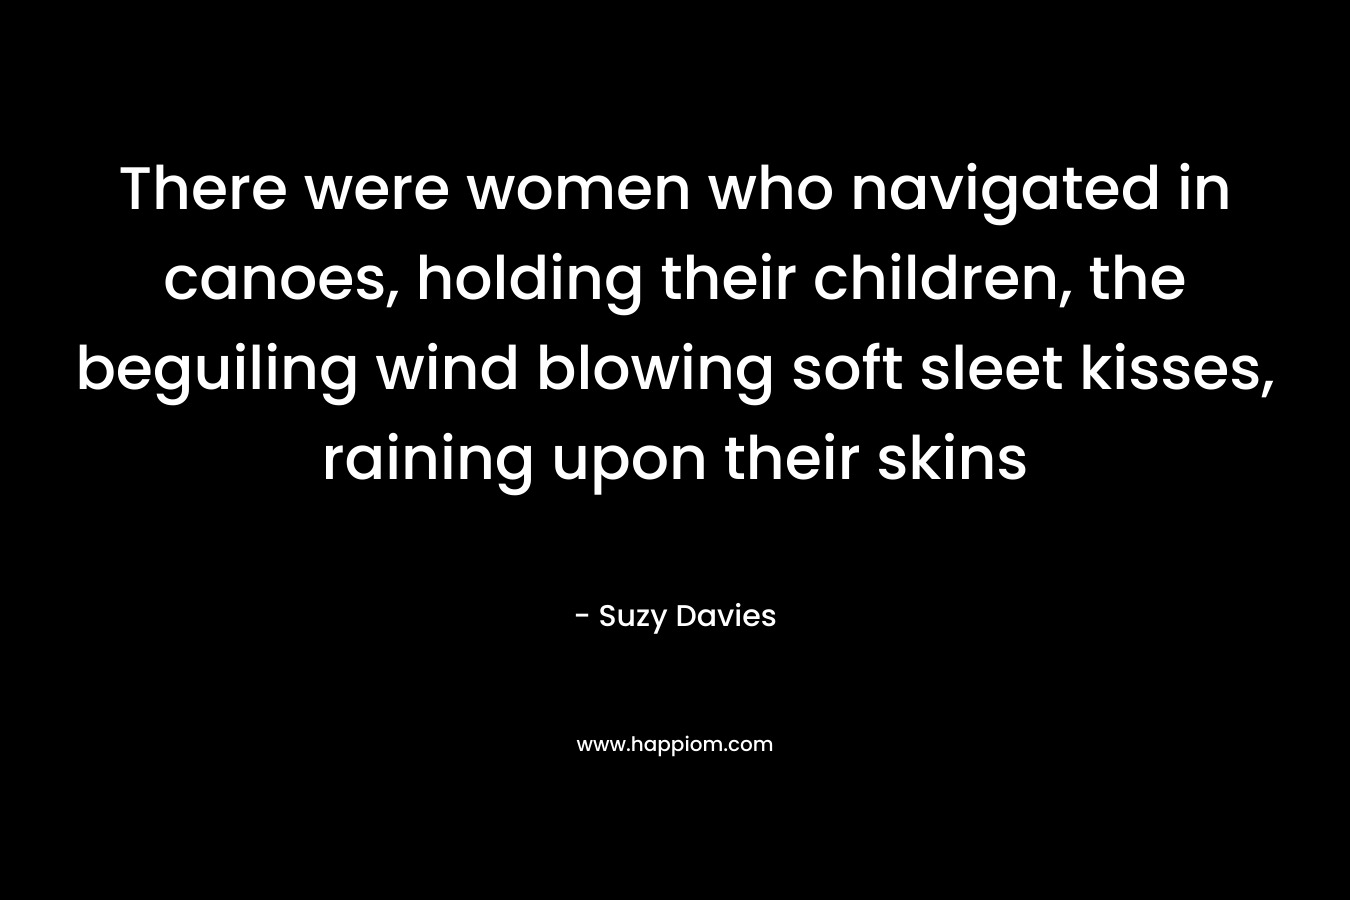 There were women who navigated in canoes, holding their children, the beguiling wind blowing soft sleet kisses, raining upon their skins